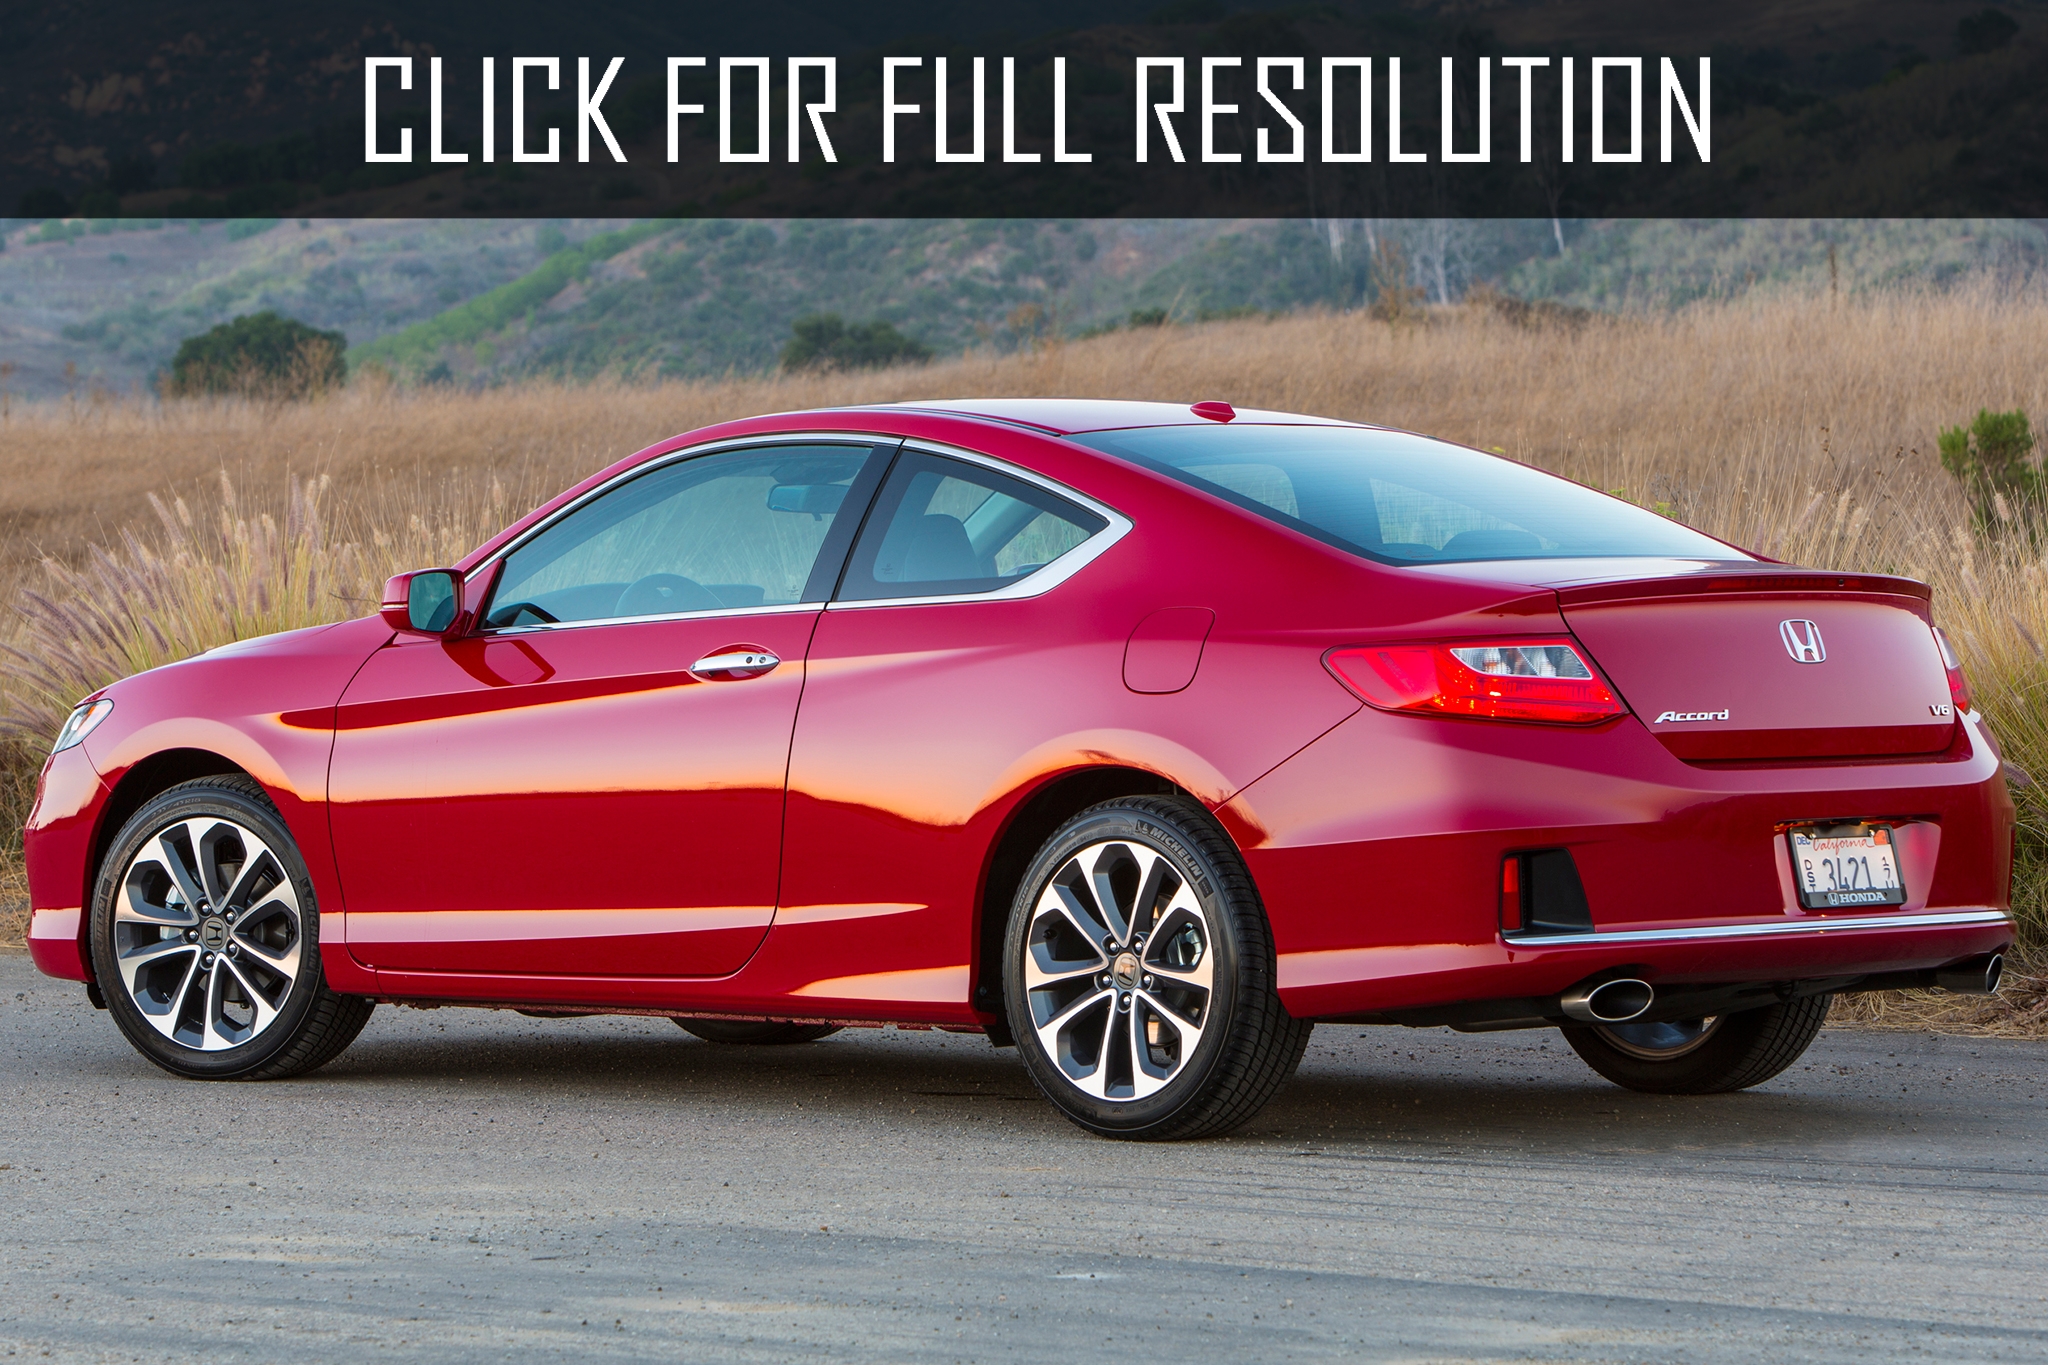 2014 Honda Accord Coupe Best Image Gallery 1720 Share And Download